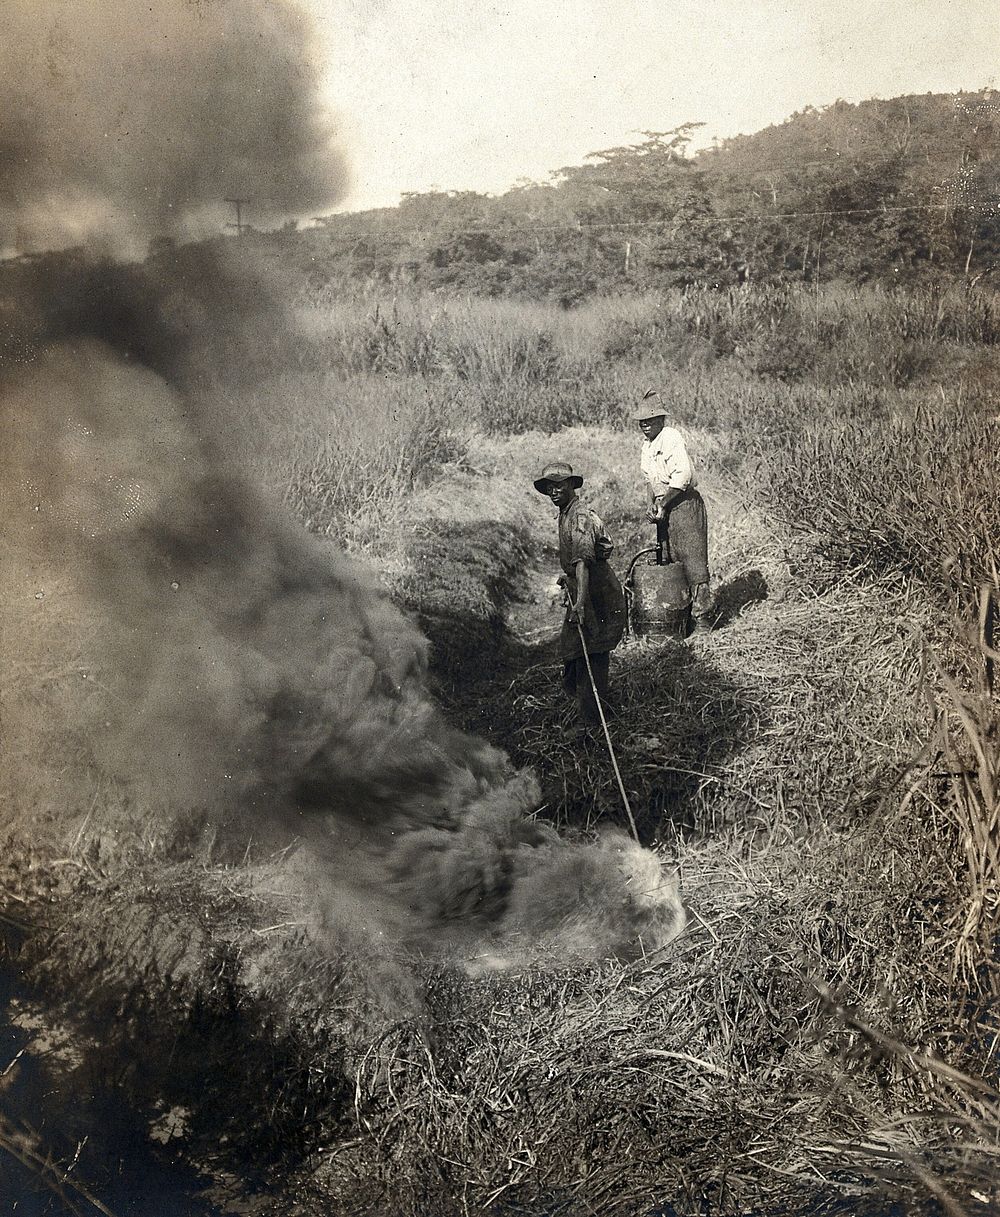 Miraflores, the Panama Canal Zone: rising smoke as two West Indian men burn grass away from the side of a ditch as part of a…